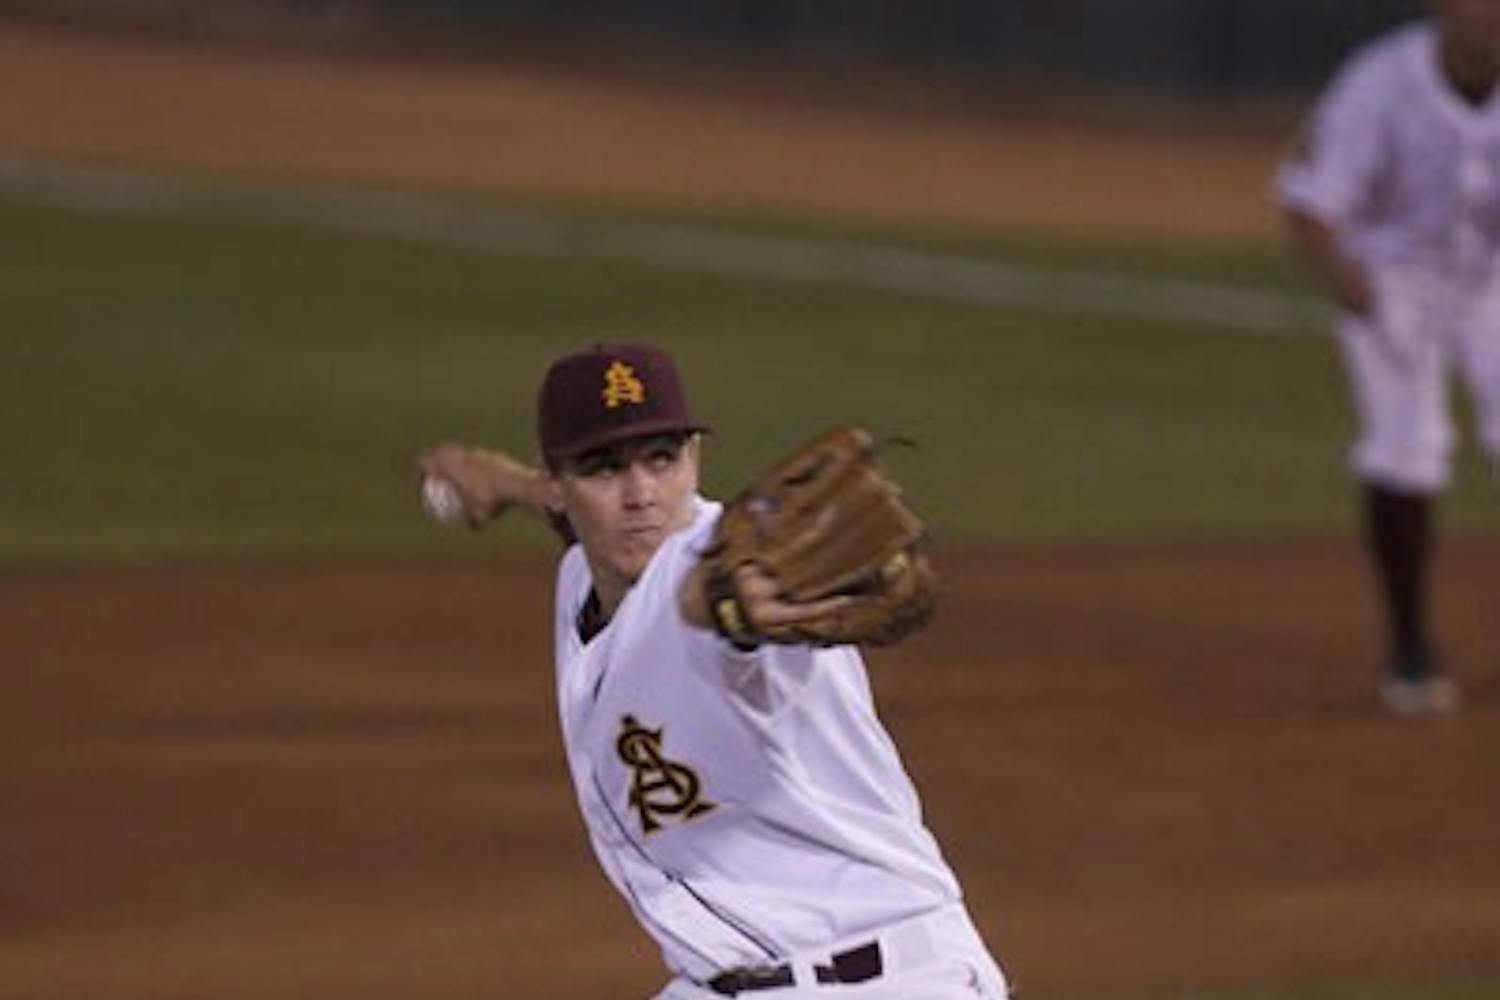 CAN'T TOUCH THIS: ASU junior Seth Blair pitched seven scoreless innings and allowed just five hits in the Sun Devils' 1-0 win over Oregon Thursday night in Eugene. The victory extended ASU's school-record winning streak to start the season to 24-0. (Photo by Scott Stuk)